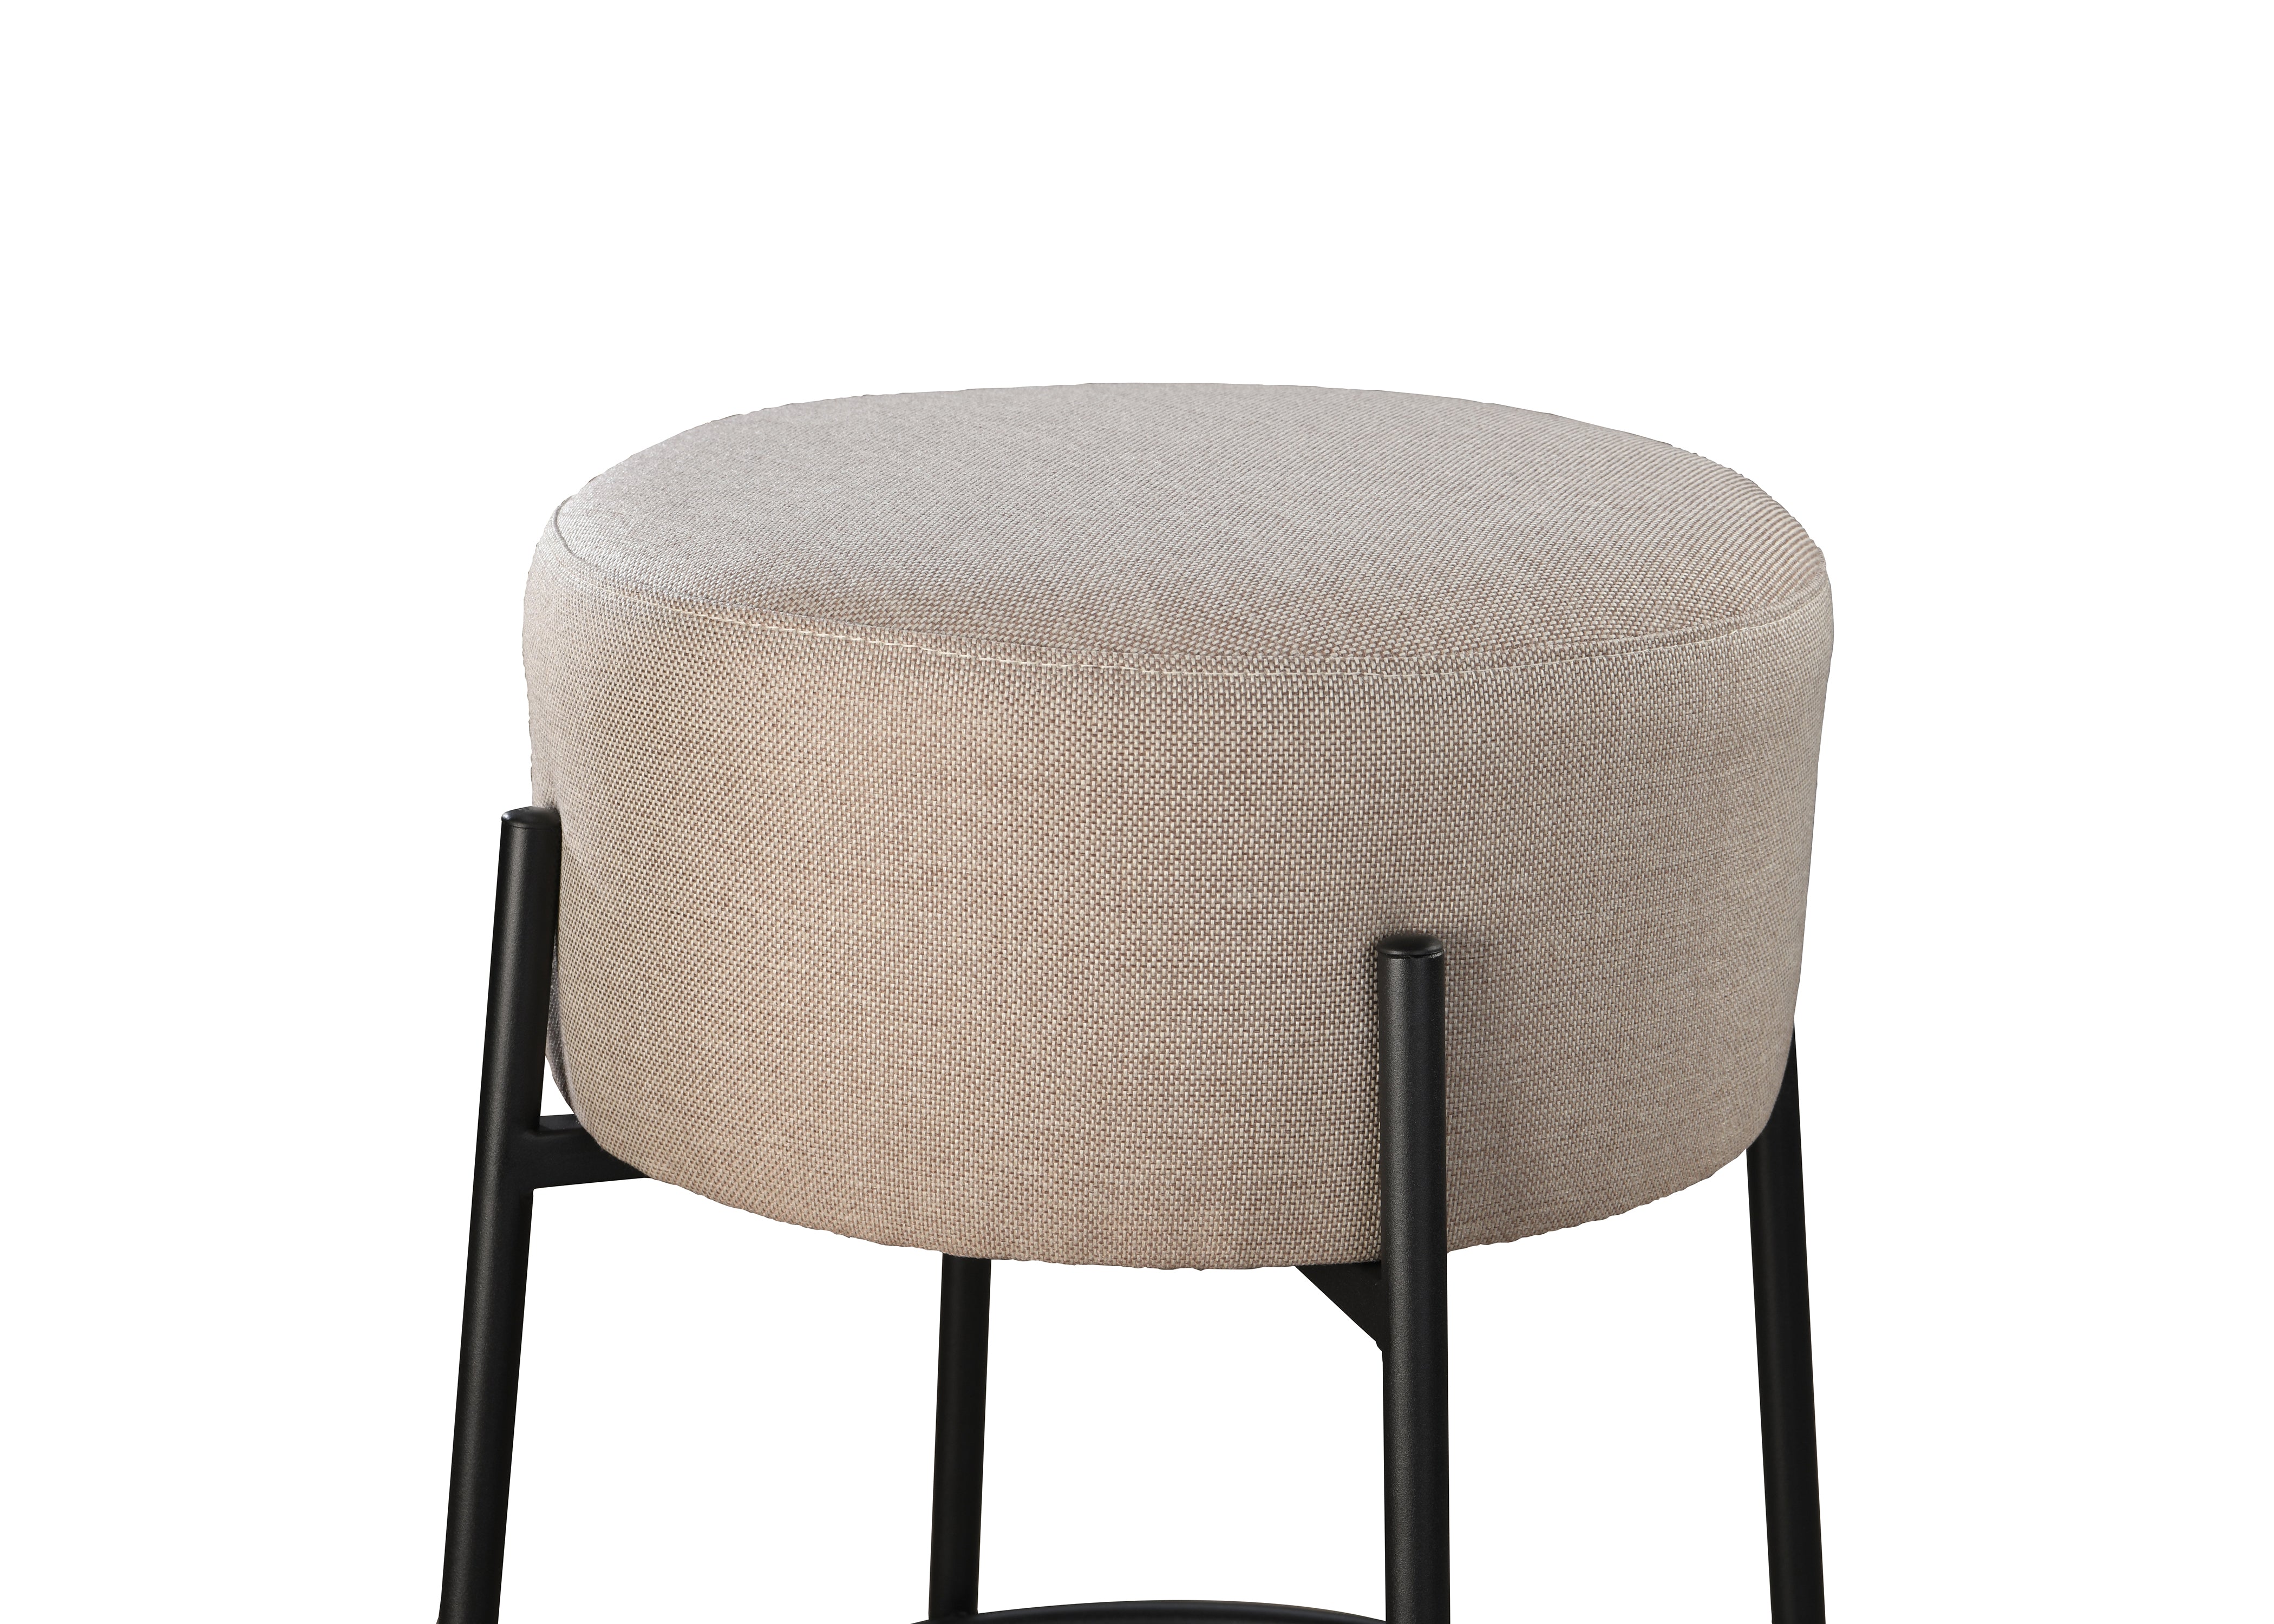 LuXeo Danica Barstool Black Steel Legs with Boucle or Polyster Fabric Upholstered Seat (Set of 2)